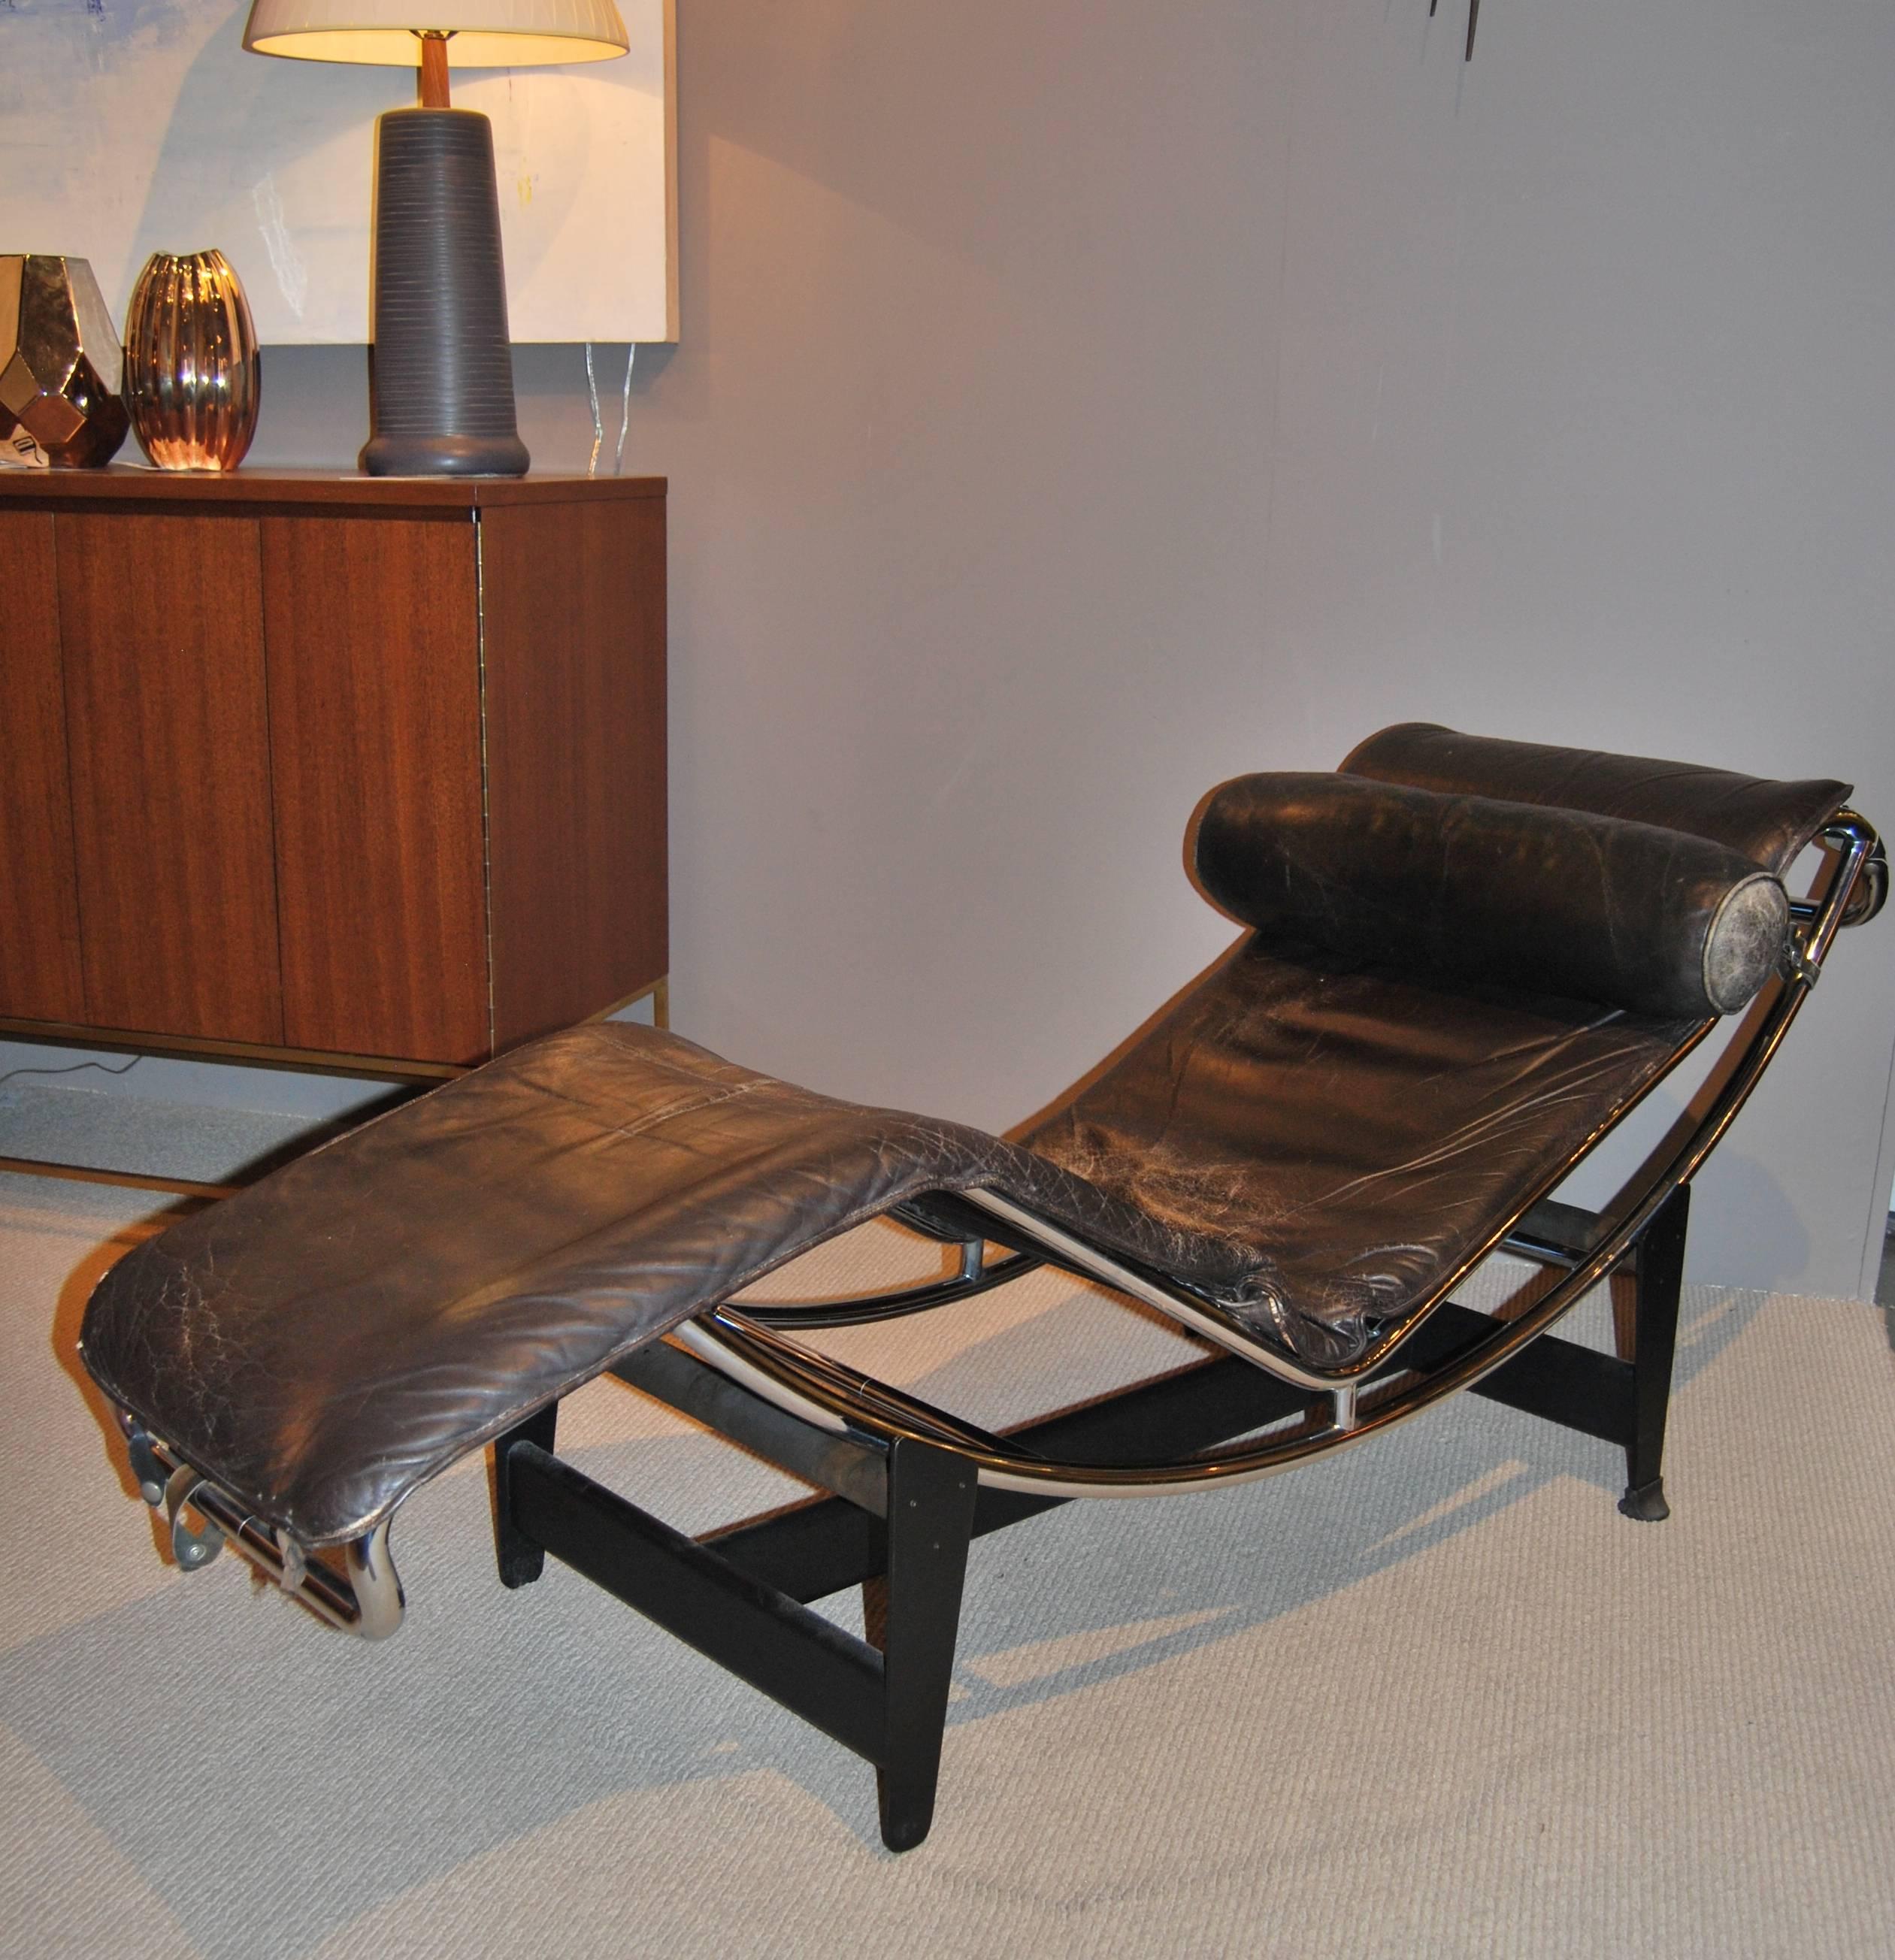 Early Le Corbusier/Jeanneret/Perriand LC4 Chaise Lounge (Moderne der Mitte des Jahrhunderts)